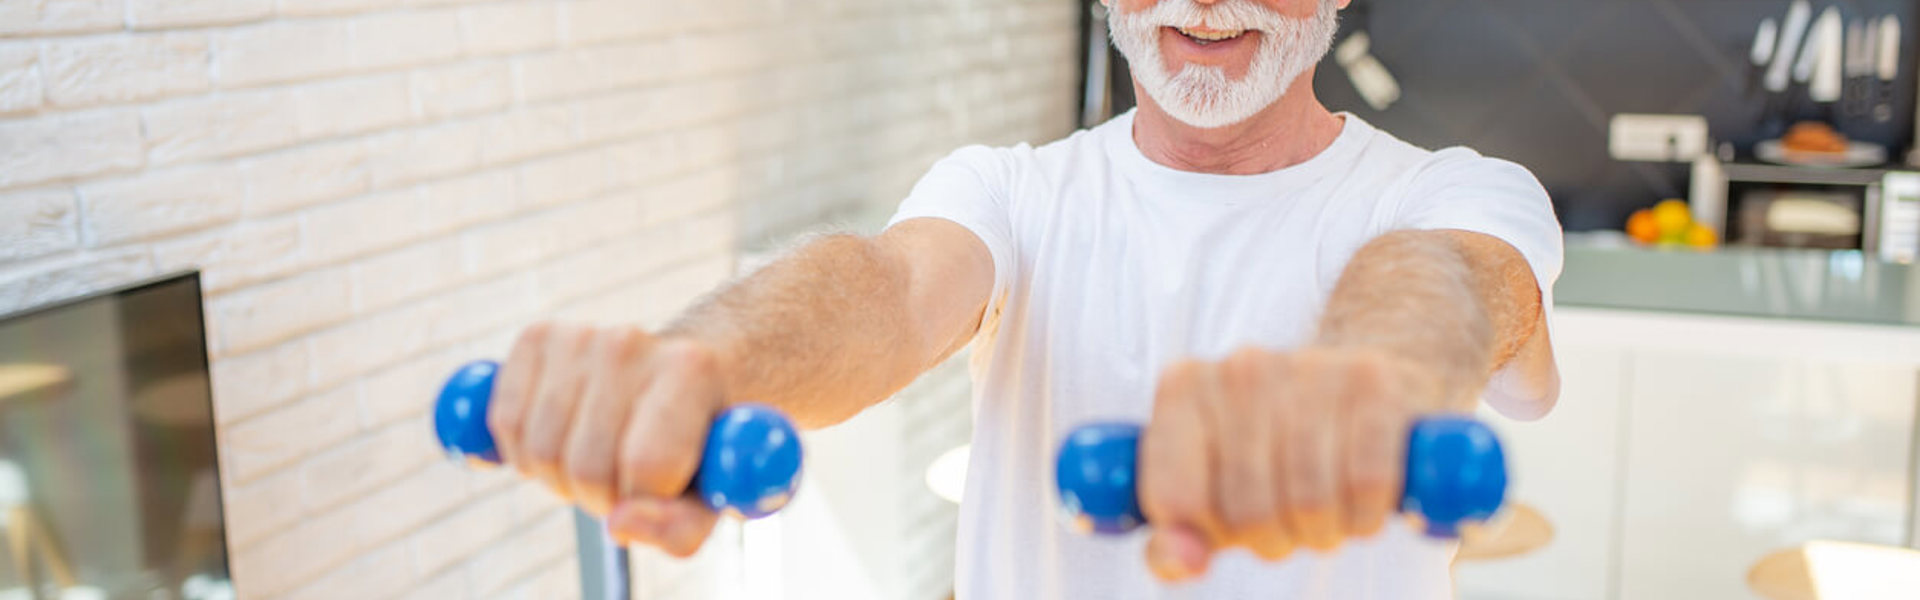 An older man wearing a white t-shirt holding small blue weights in front of him in his kitchen